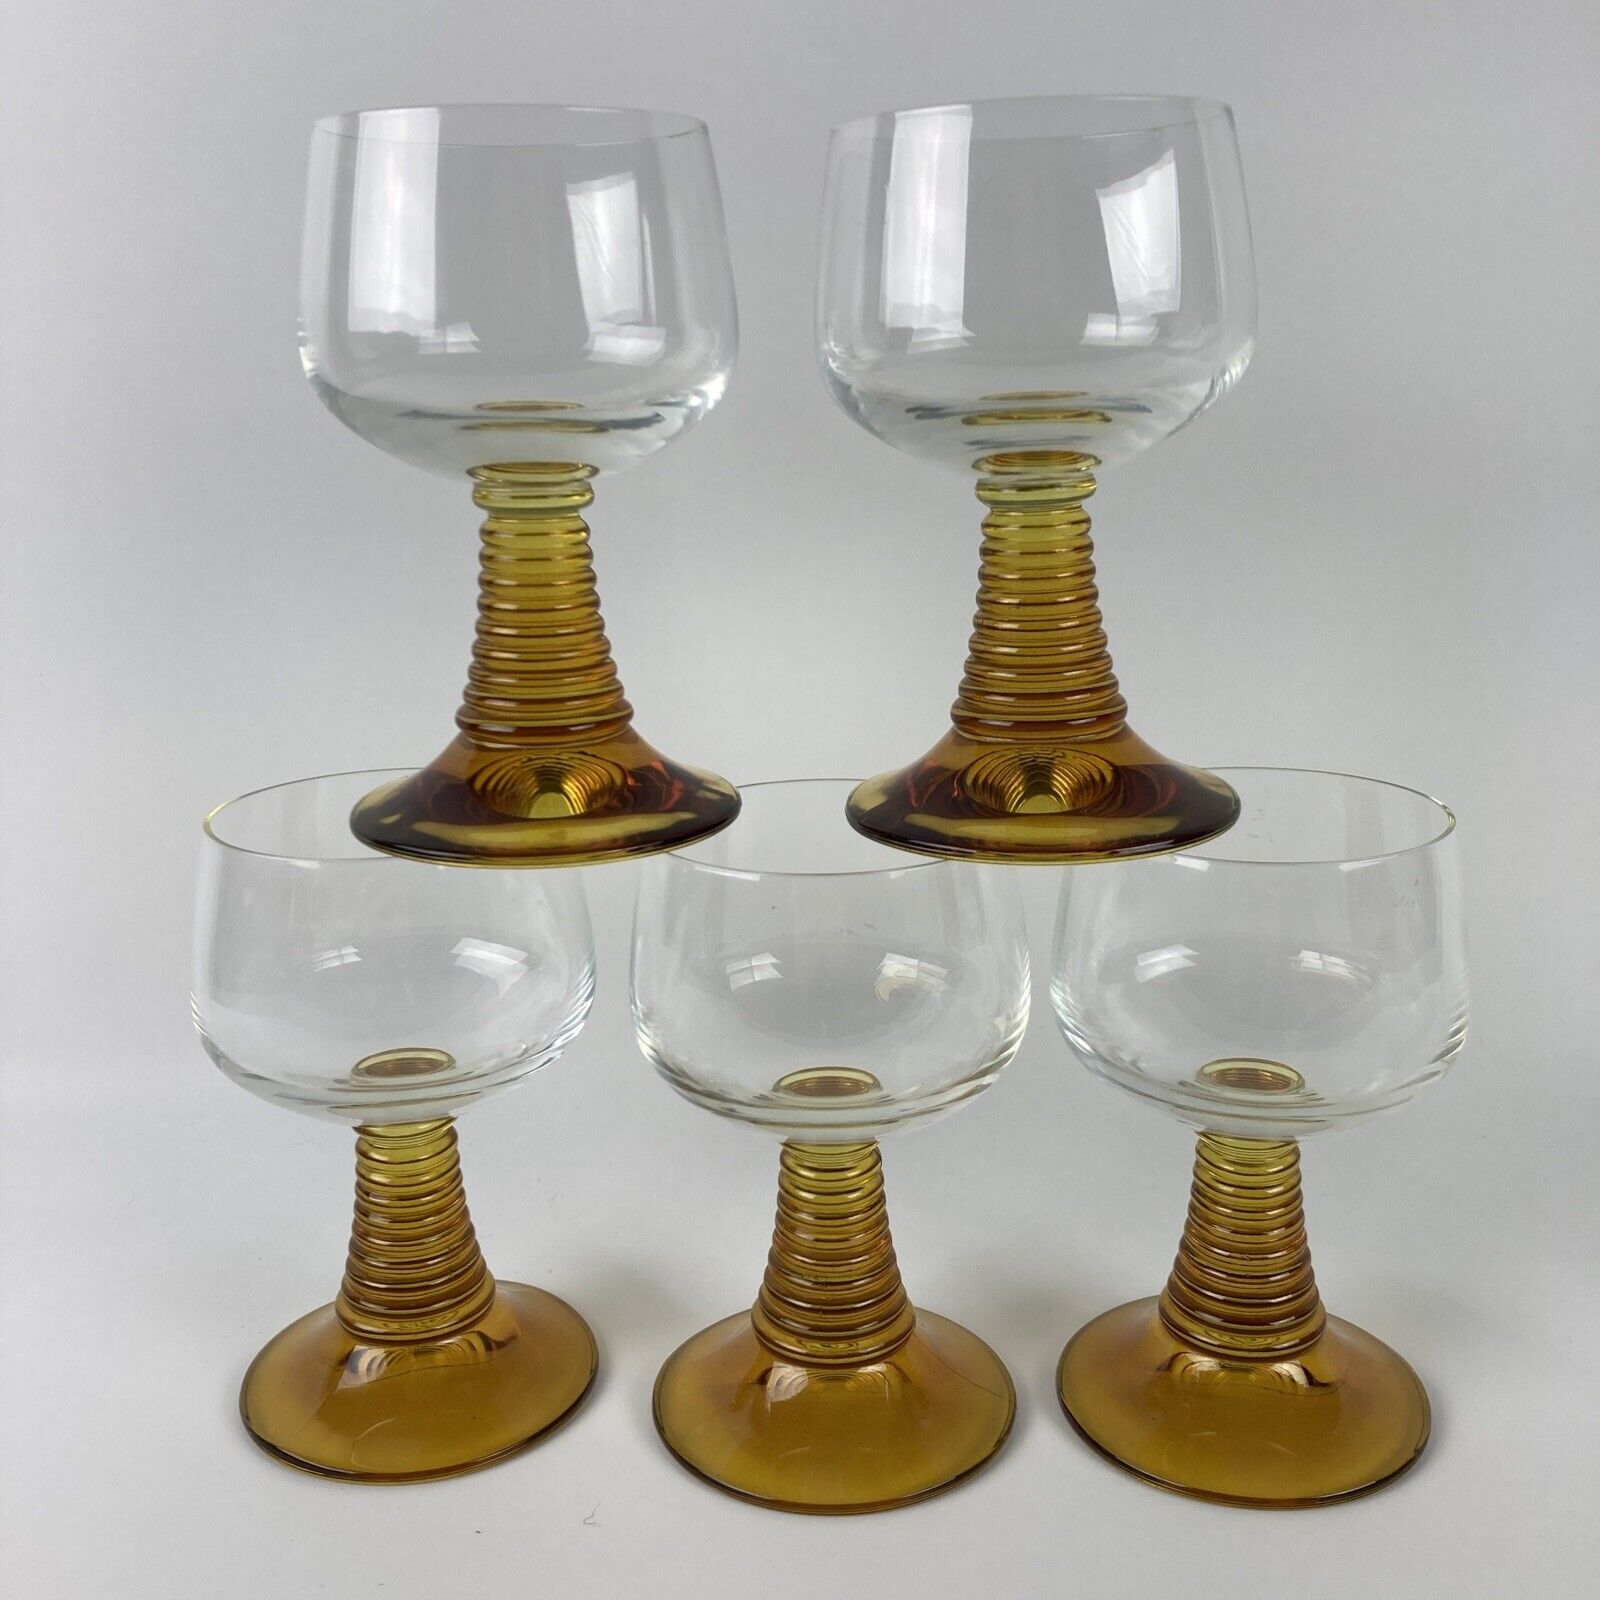 Roemer Goblets Set of 5 Amber Beehive Ribbed Glass Stems 5.5 inches vintage